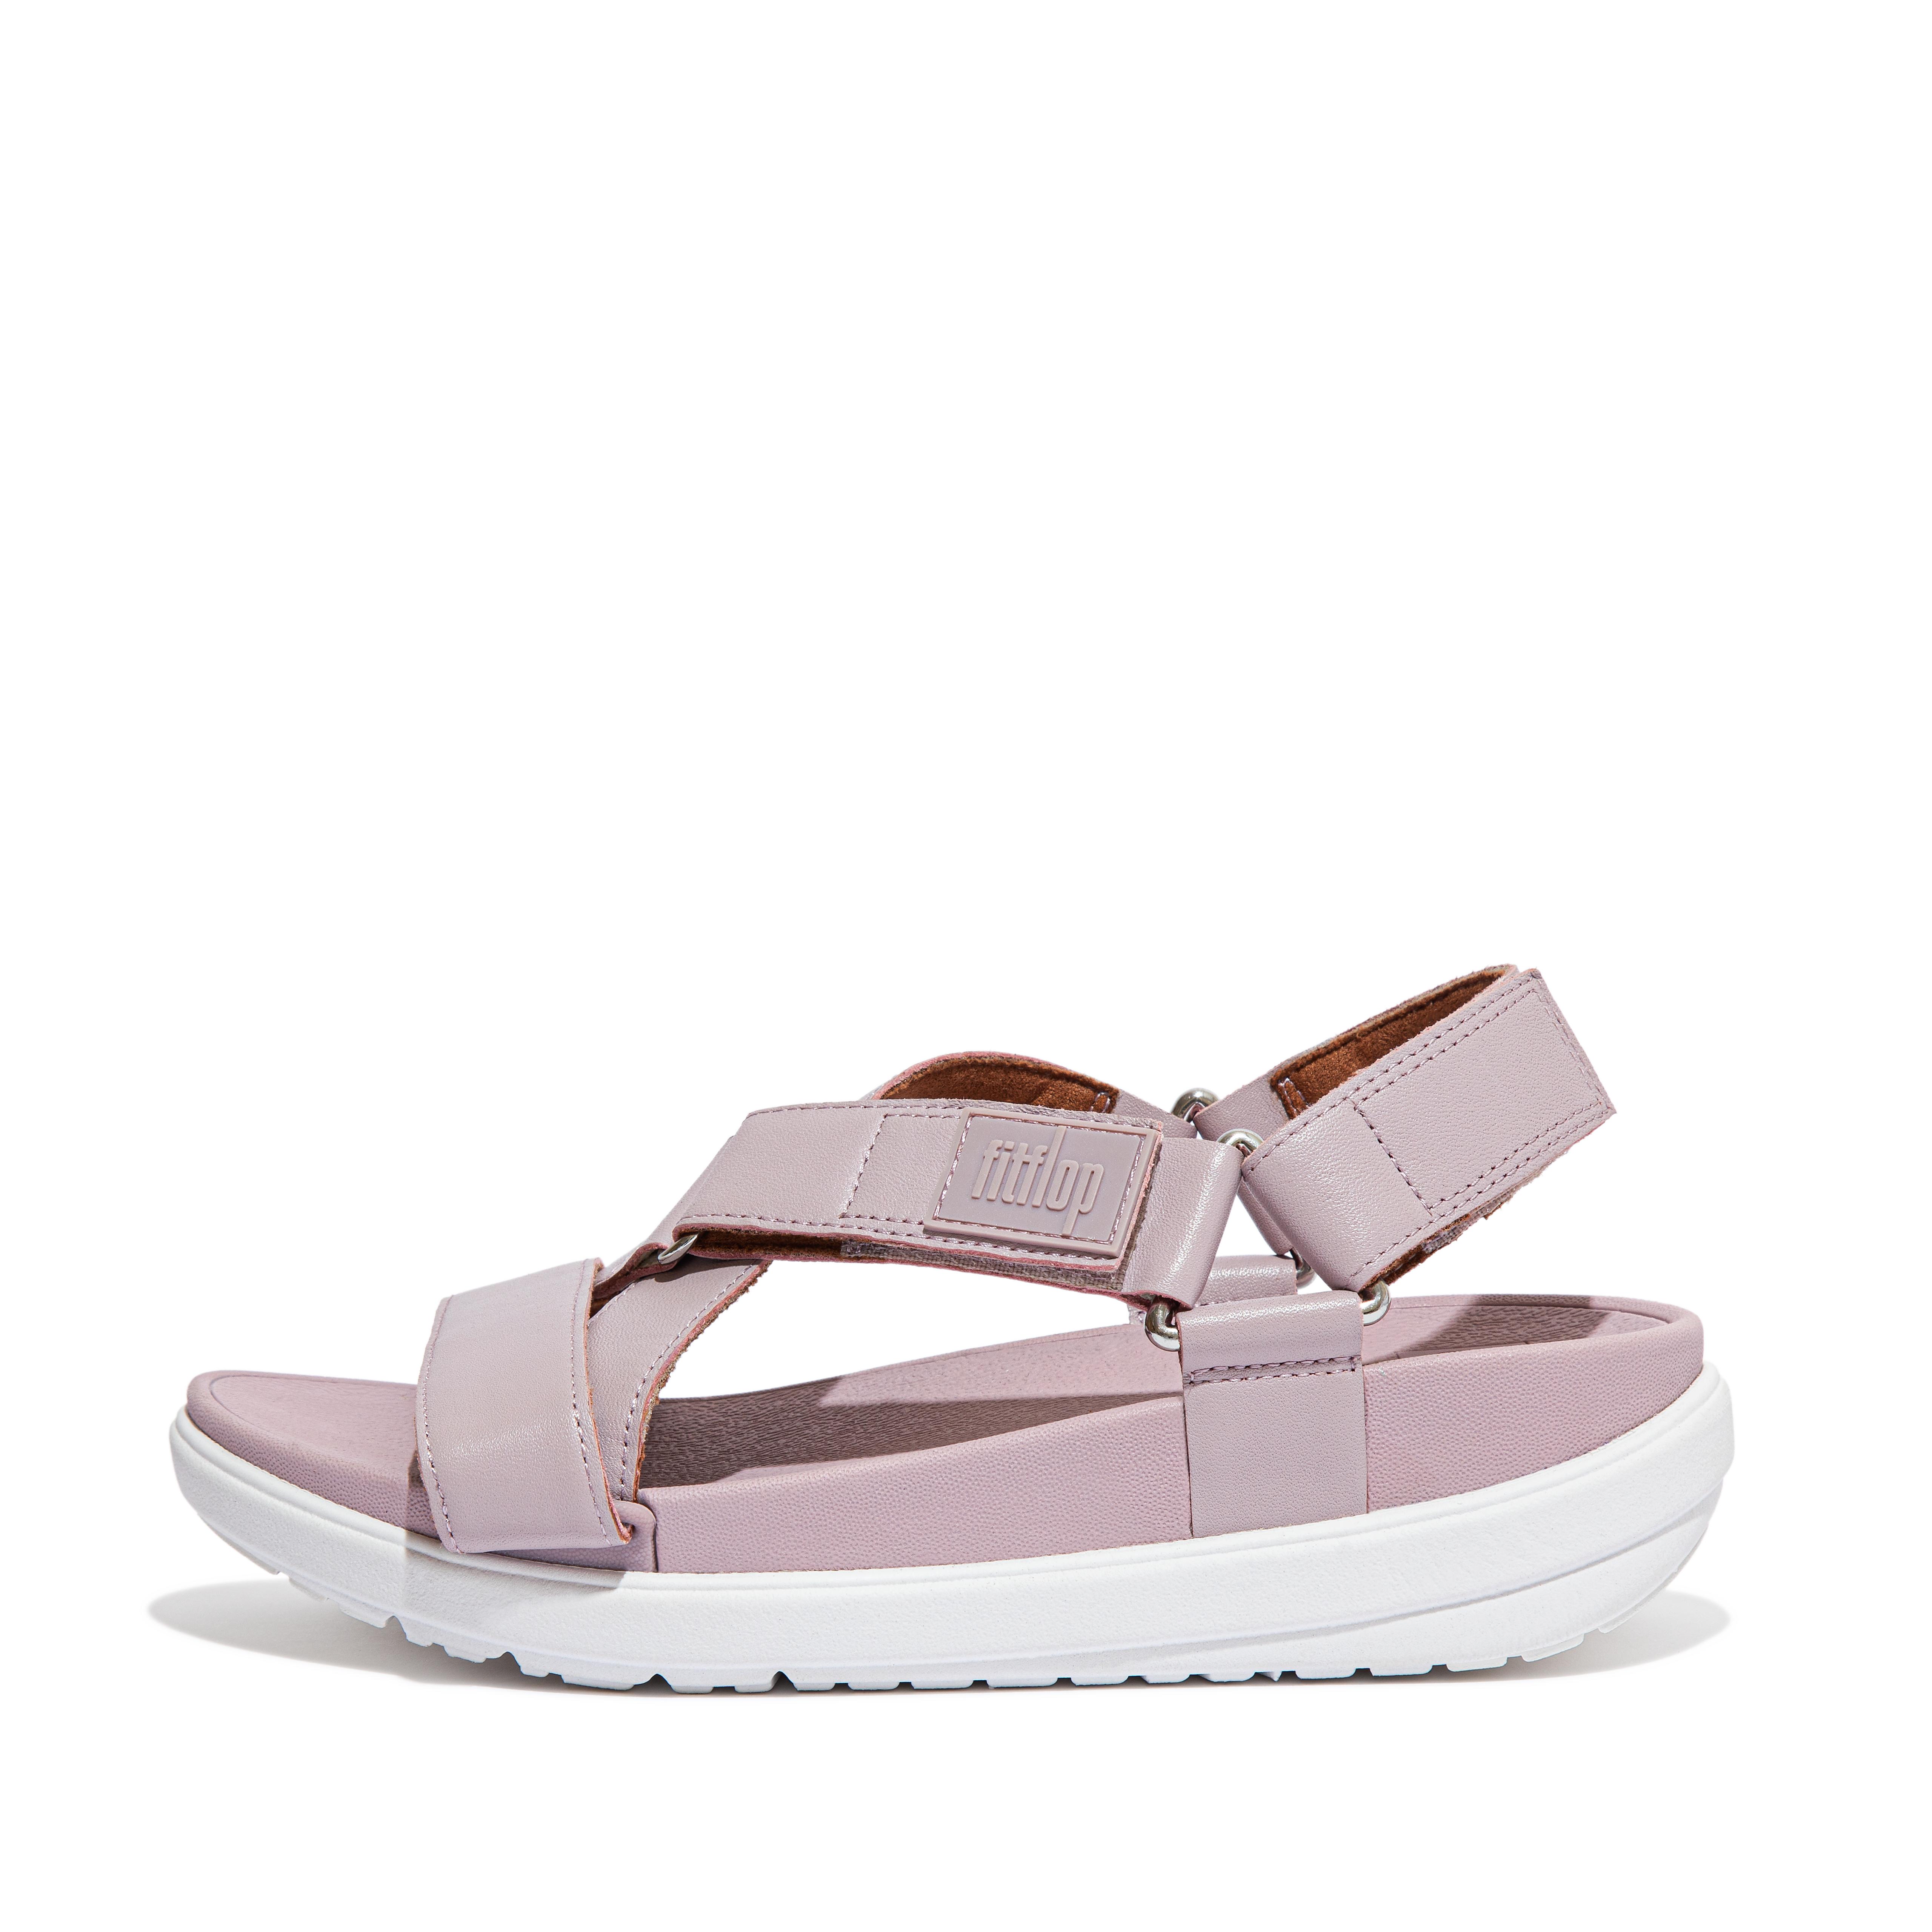 Women's Loosh Leather Cross Strap Sandals | FitFlop US